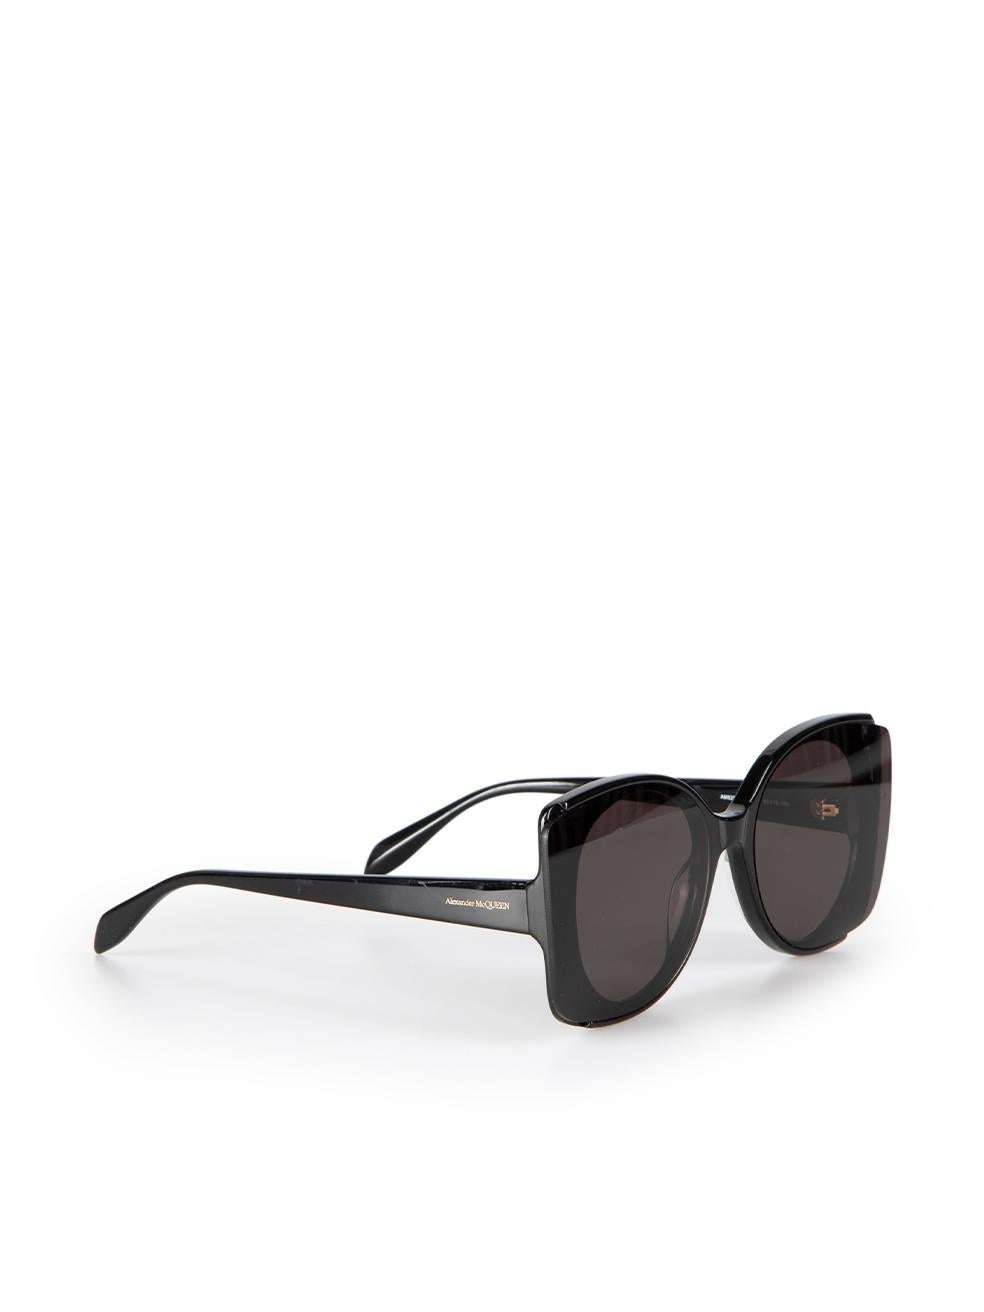 CONDITION is Very good. Hardly any visible wear to sunglasses is evident on this used Alexander McQueen designer resale item. This item comes with original case.



Details


Black

Plastic

Oversized butterfly frame sunglasses

Black tinted